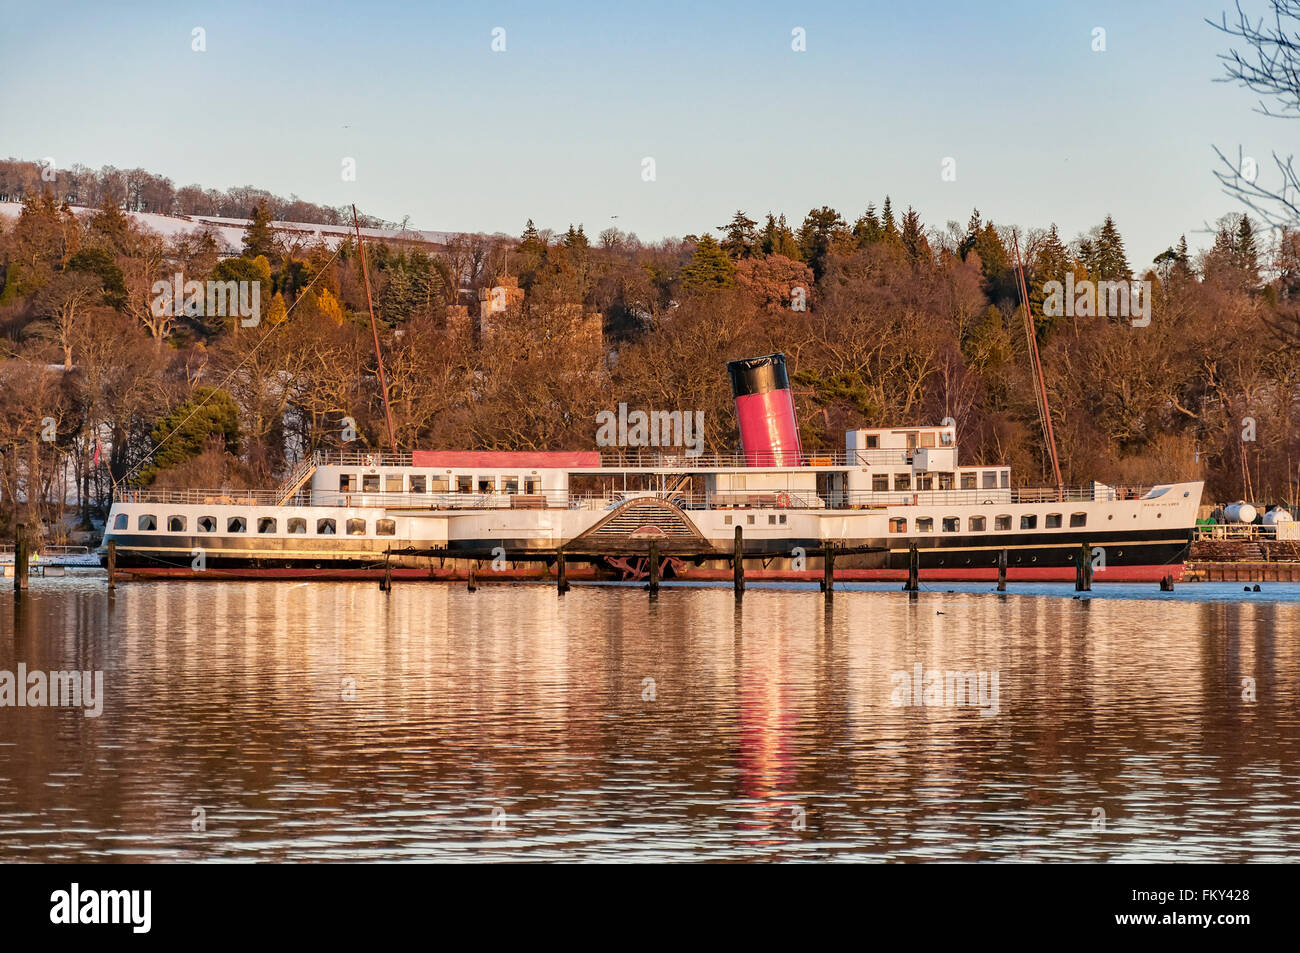 A view of the maid of the loch paddle steamer from across loch lomond near the scottish town of balloch. Stock Photo